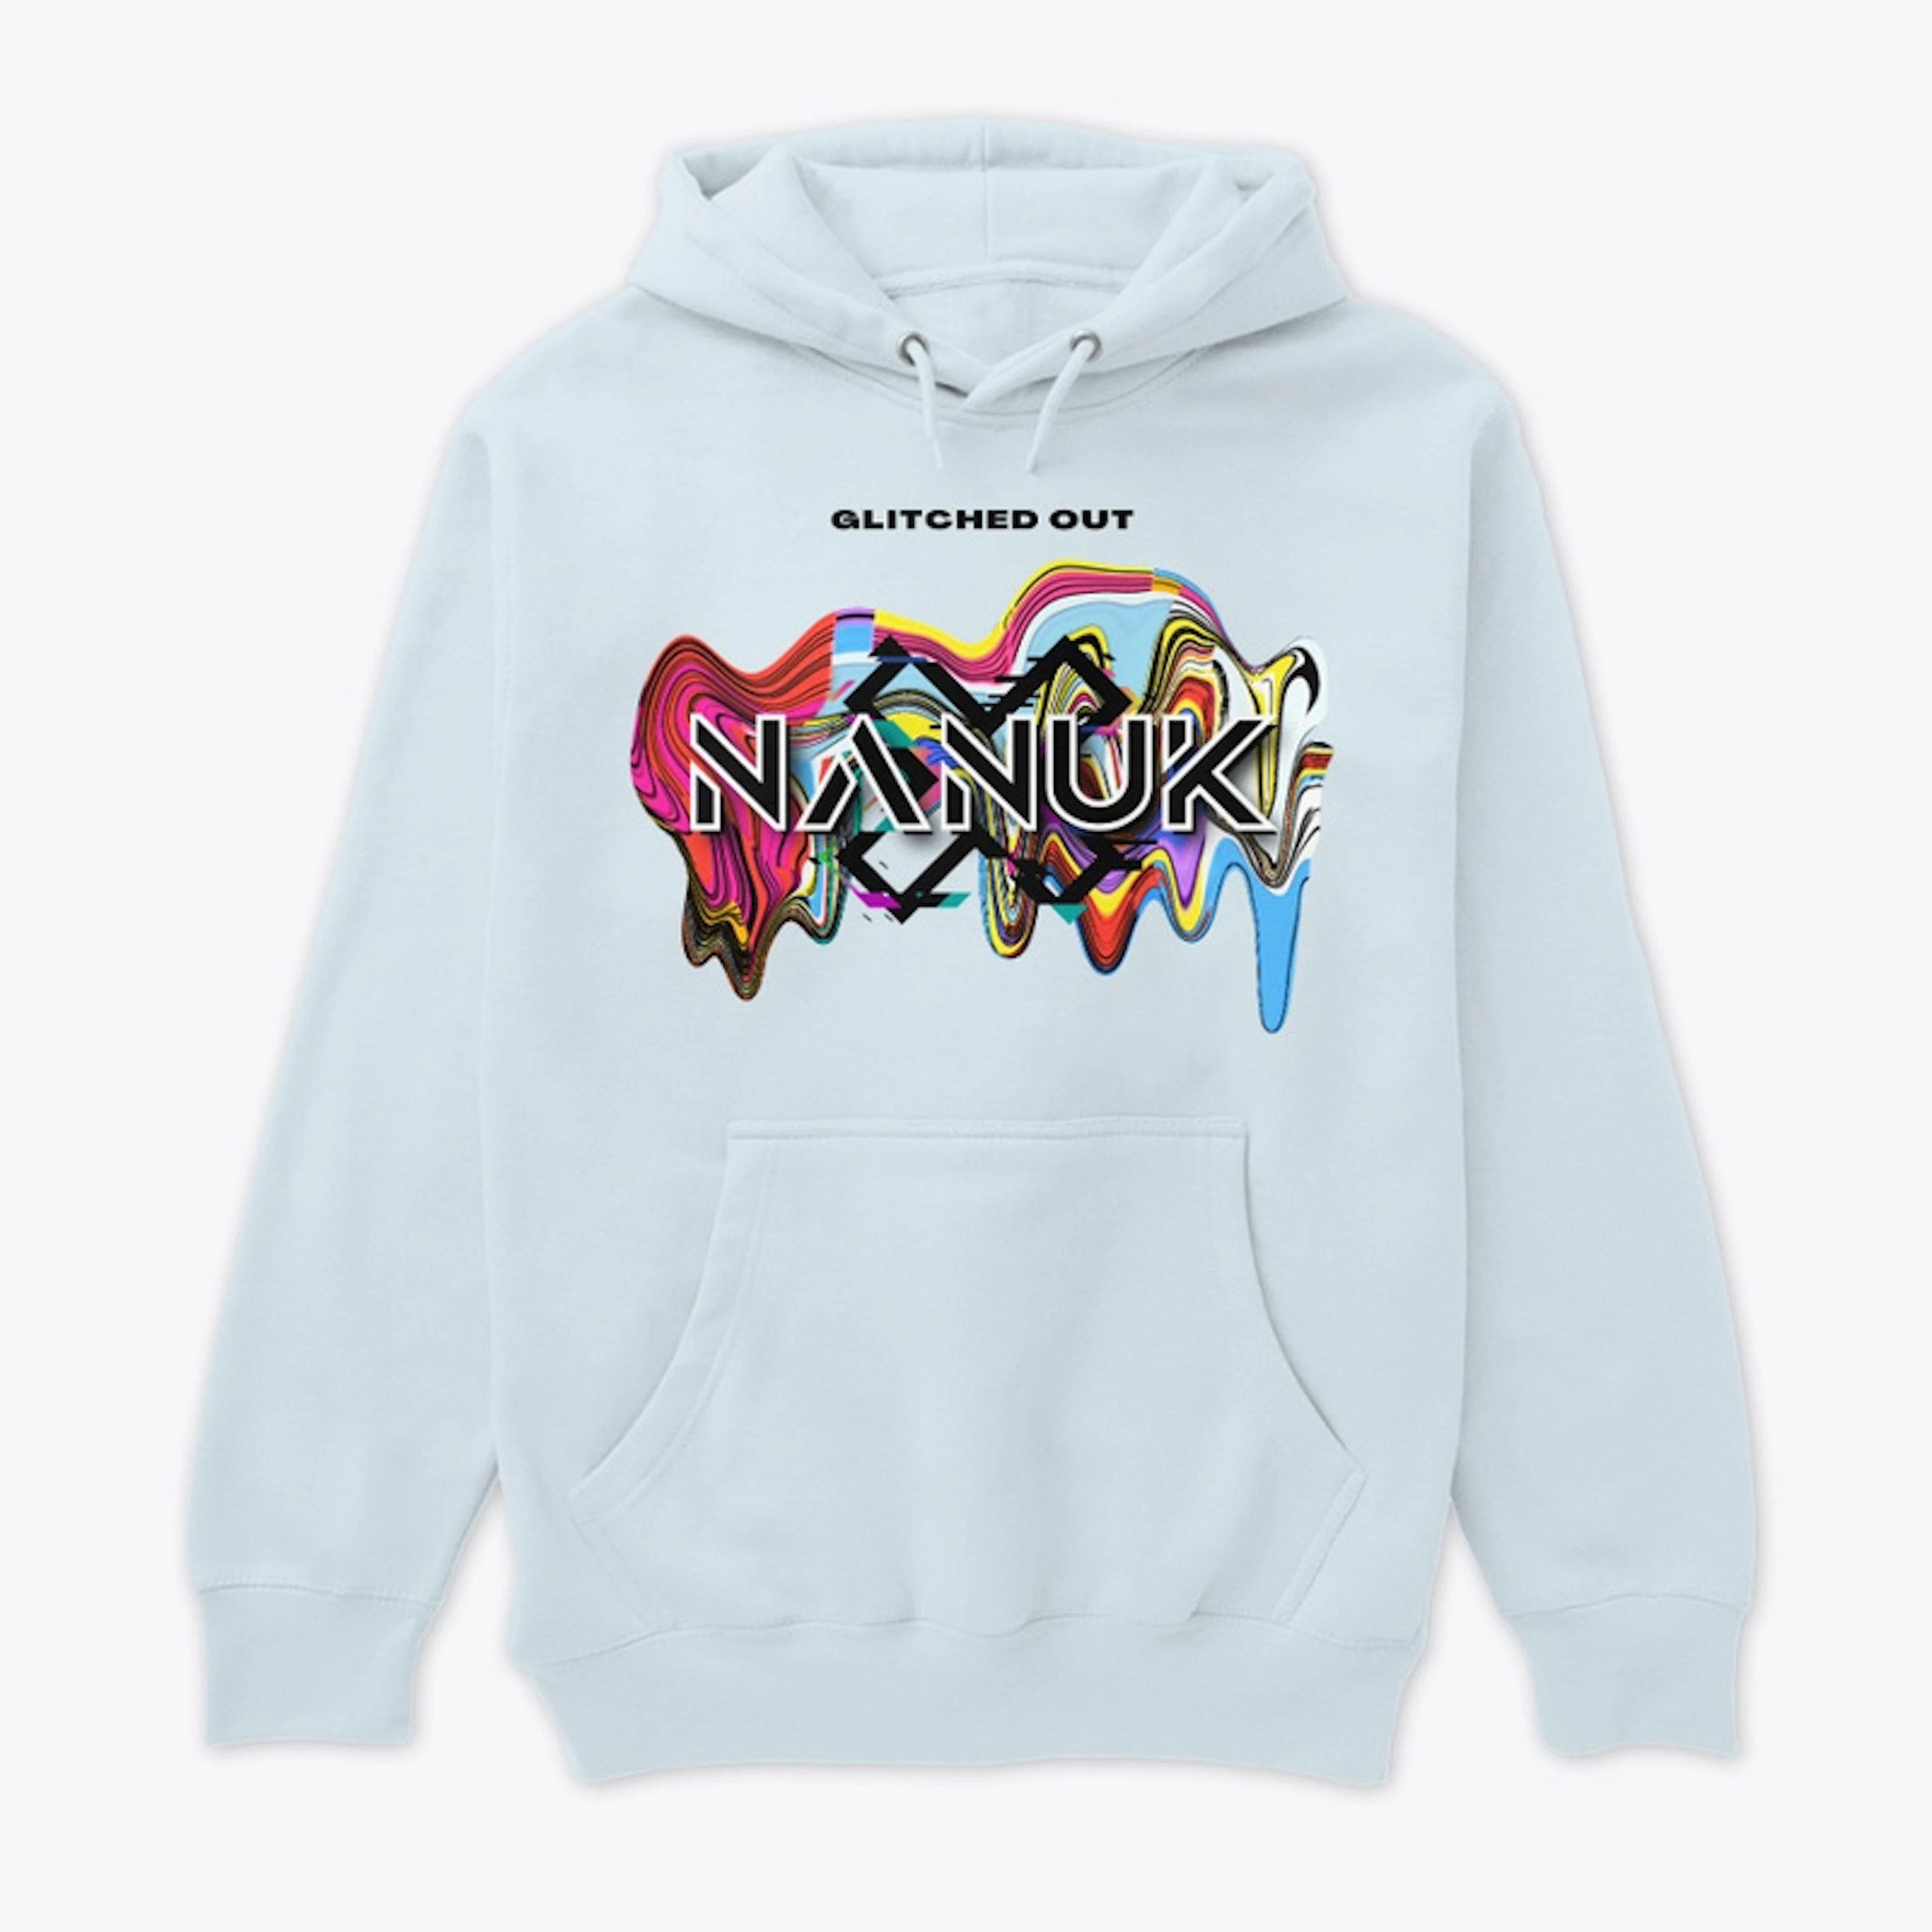 Glitched Out Hoodie - Light Colors